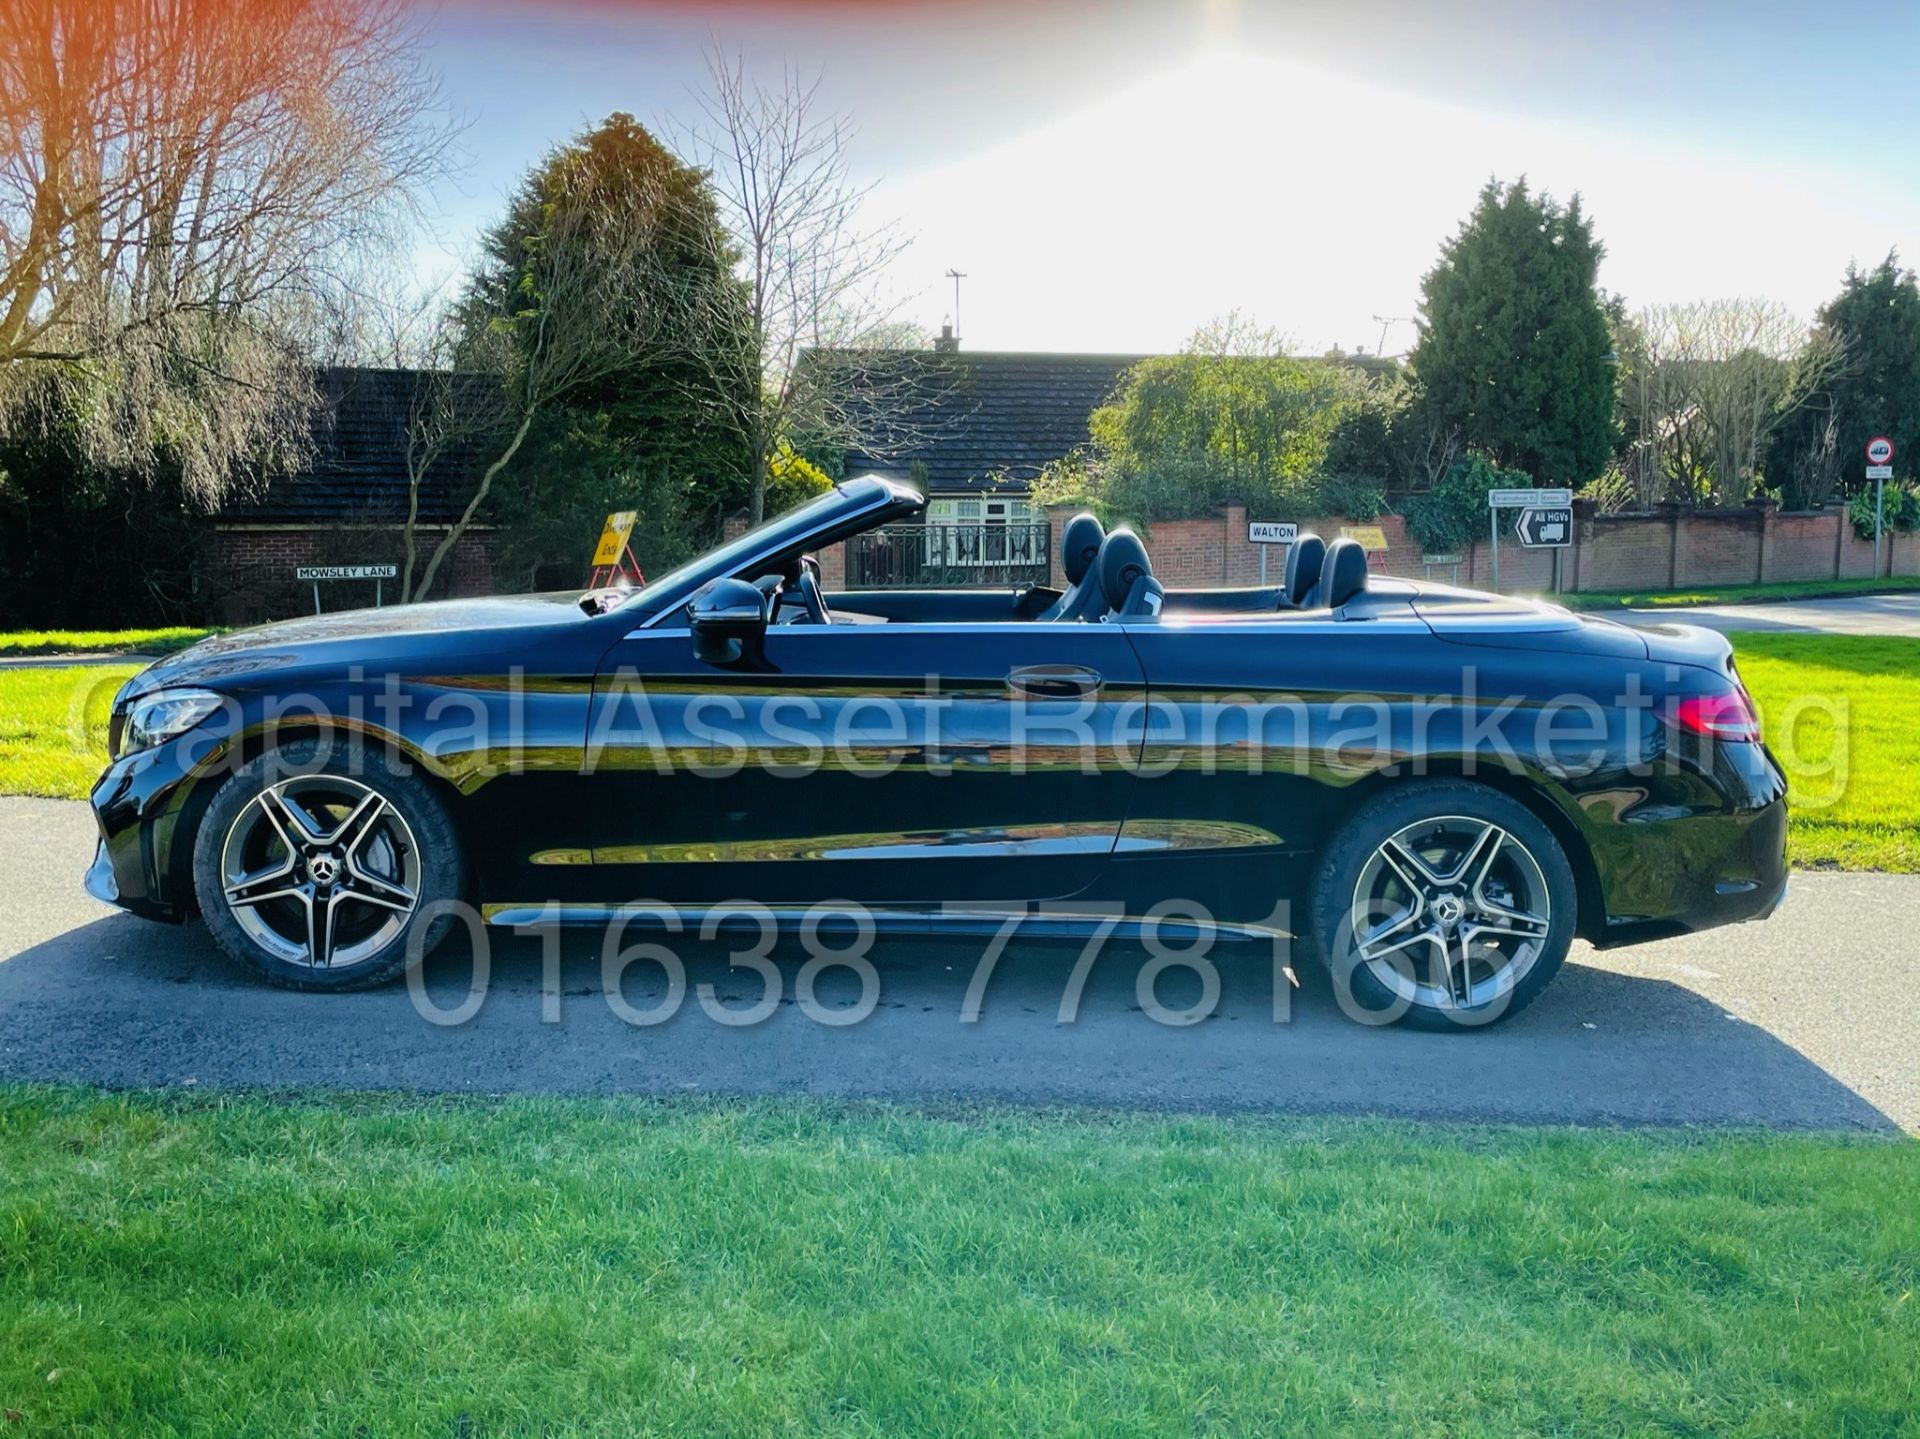 ON SALE MERCEDES-BENZ C220D *AMG LINE - CABRIOLET* (2019) '9G TRONIC AUTO - LEATHER - SAT NAV' - Image 3 of 59